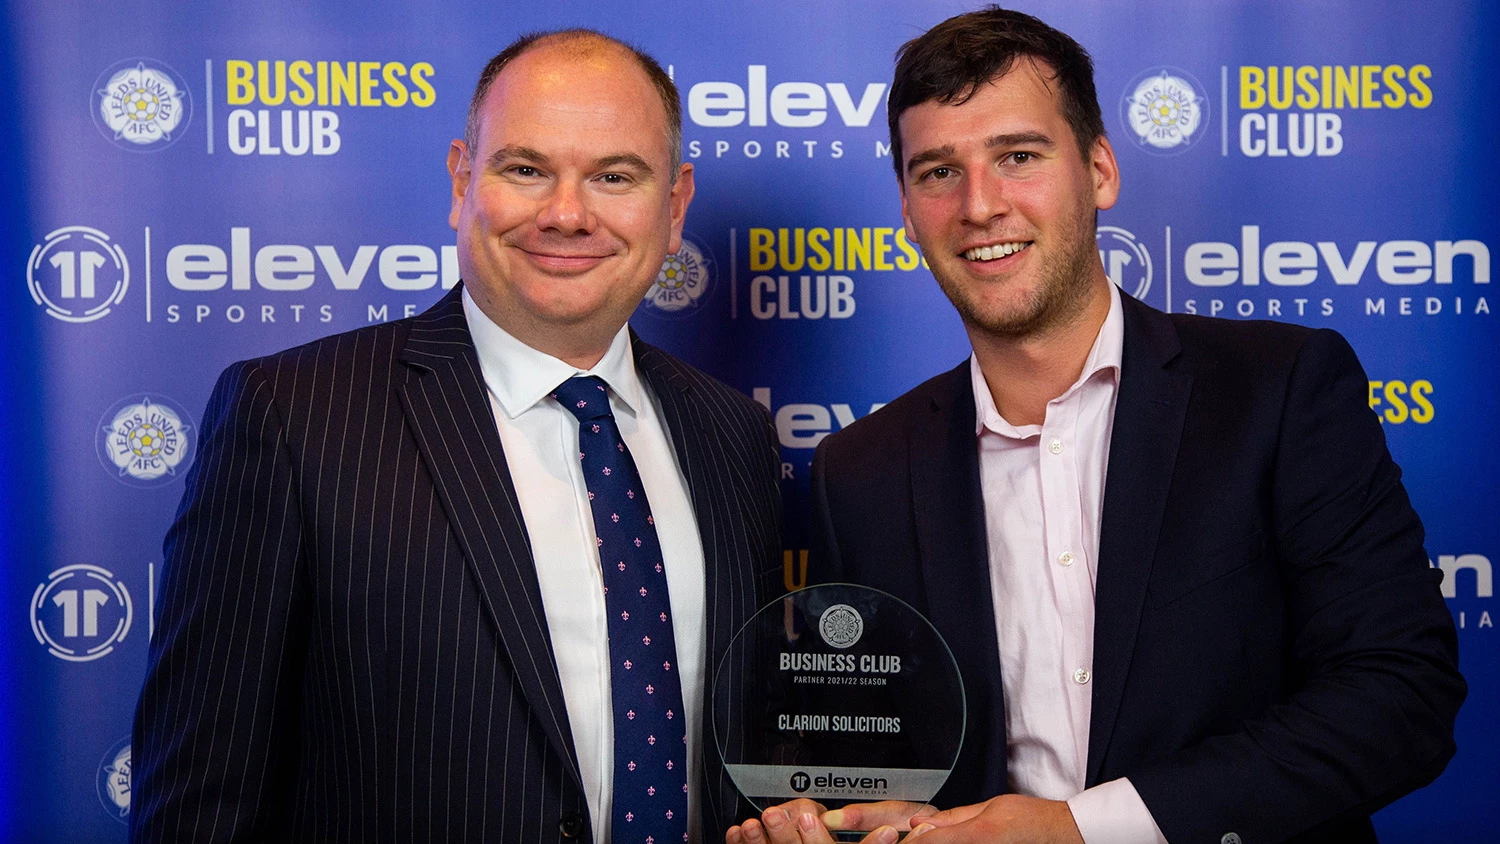 Clarion's Jonathan Simms And Andrew Curtis Celebrating The Company's Leeds United Business Club Partnership